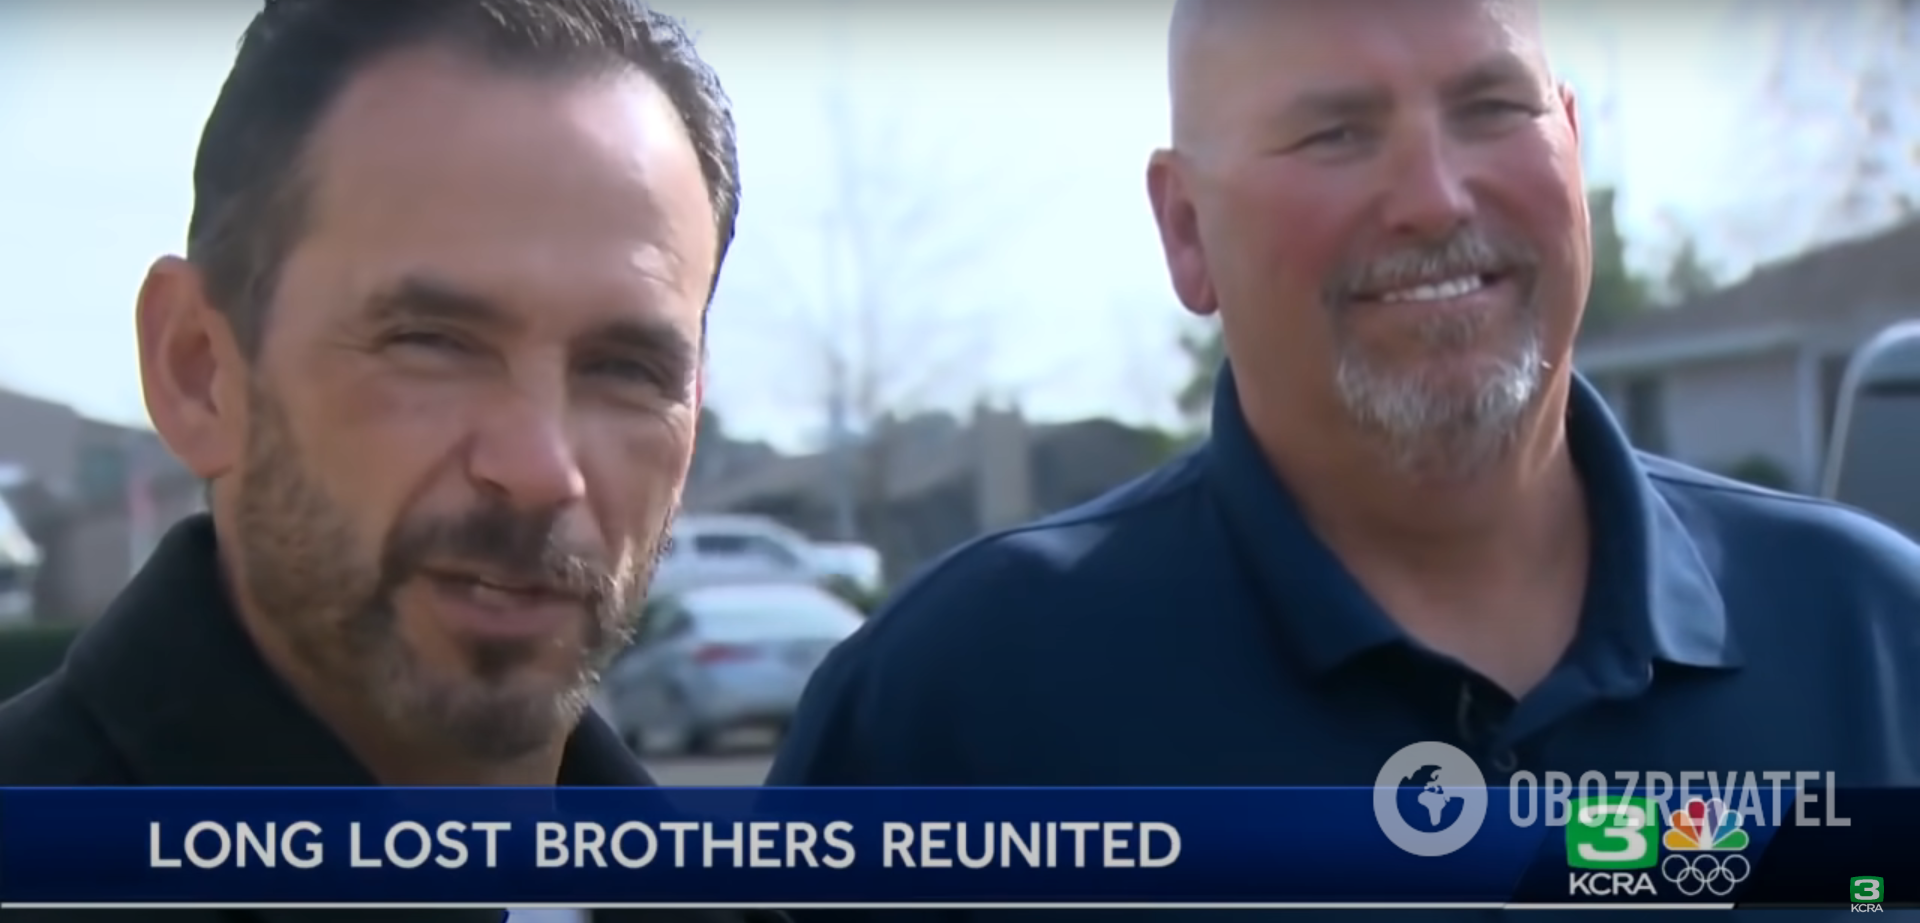 An American man met his brother by chance thanks to a weather forecast: the men hadn't realized each other existed for 50 years. Video.